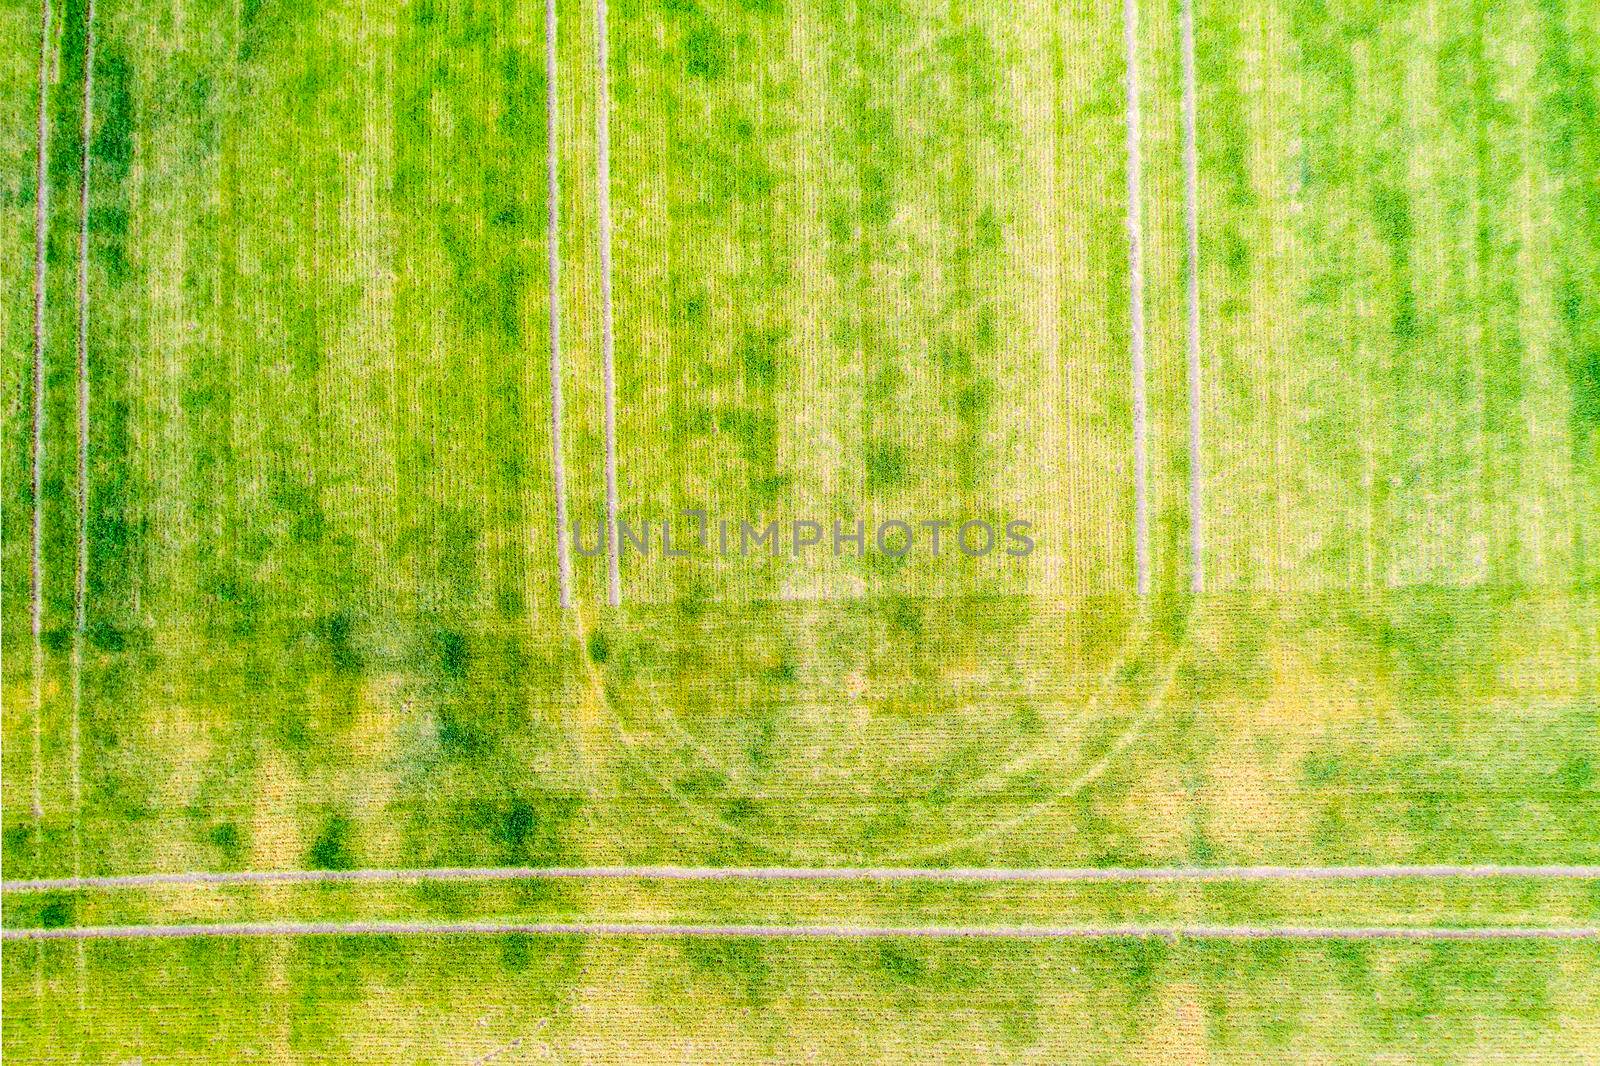 Tractor traces on green field by savcoco